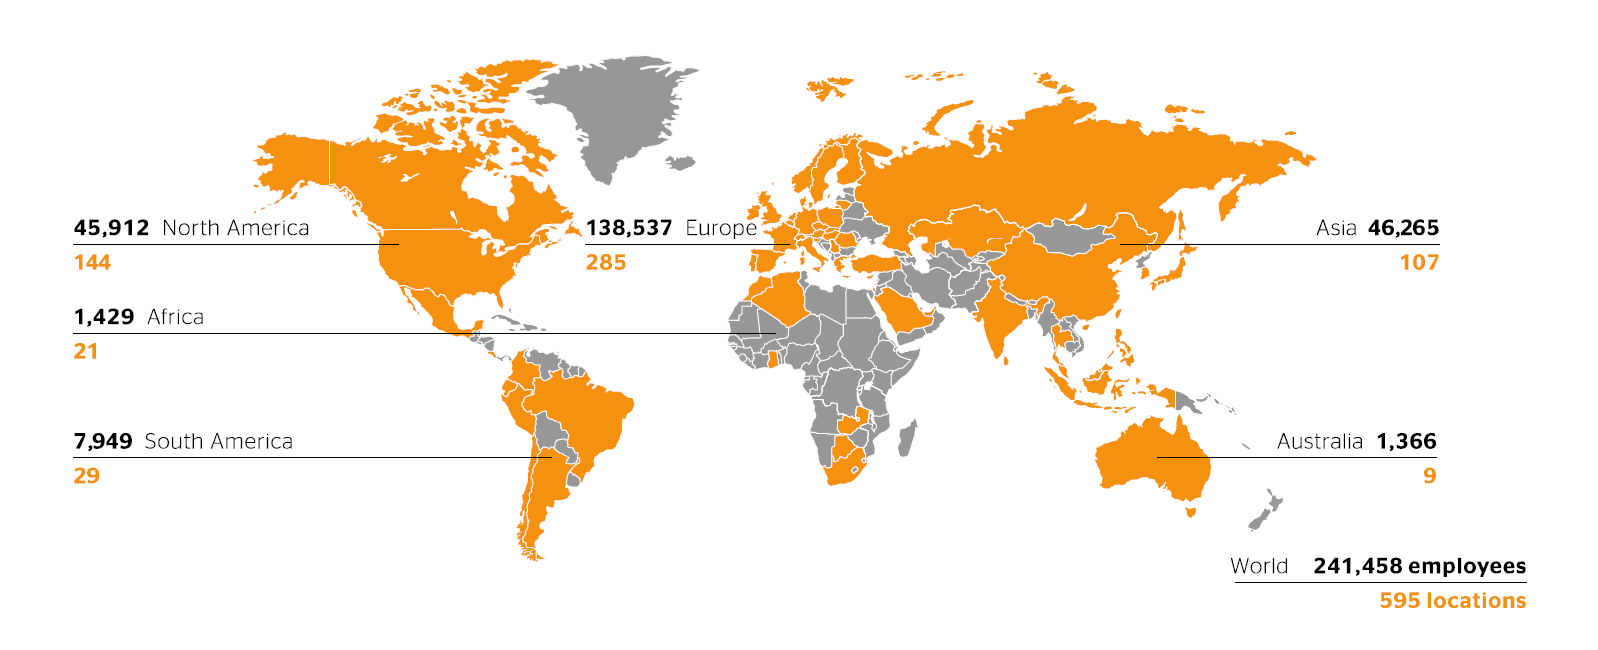 595 locations in 59 countries and markets